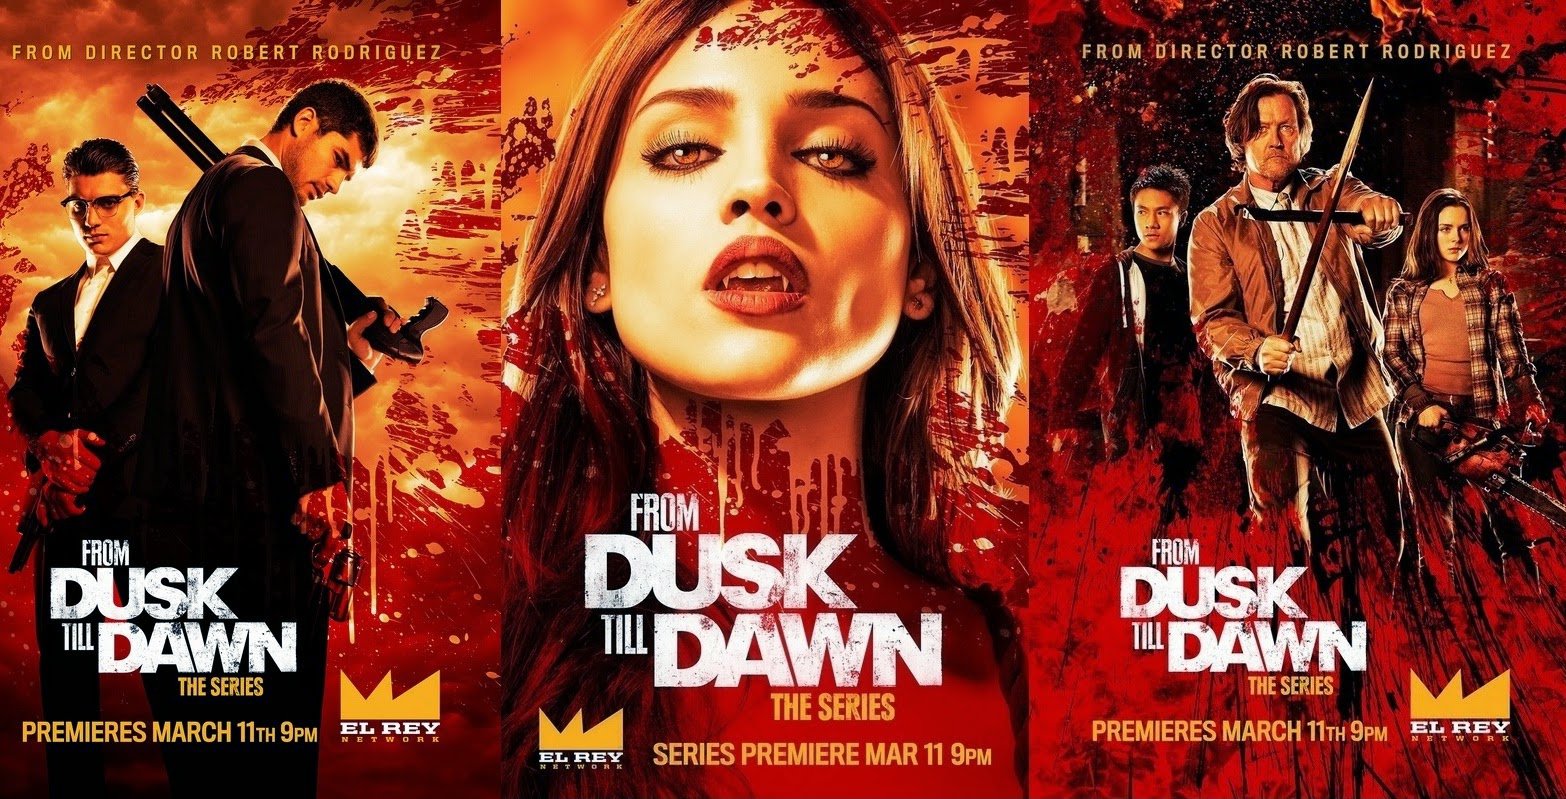 From Dusk Till Dawn: The Series #18